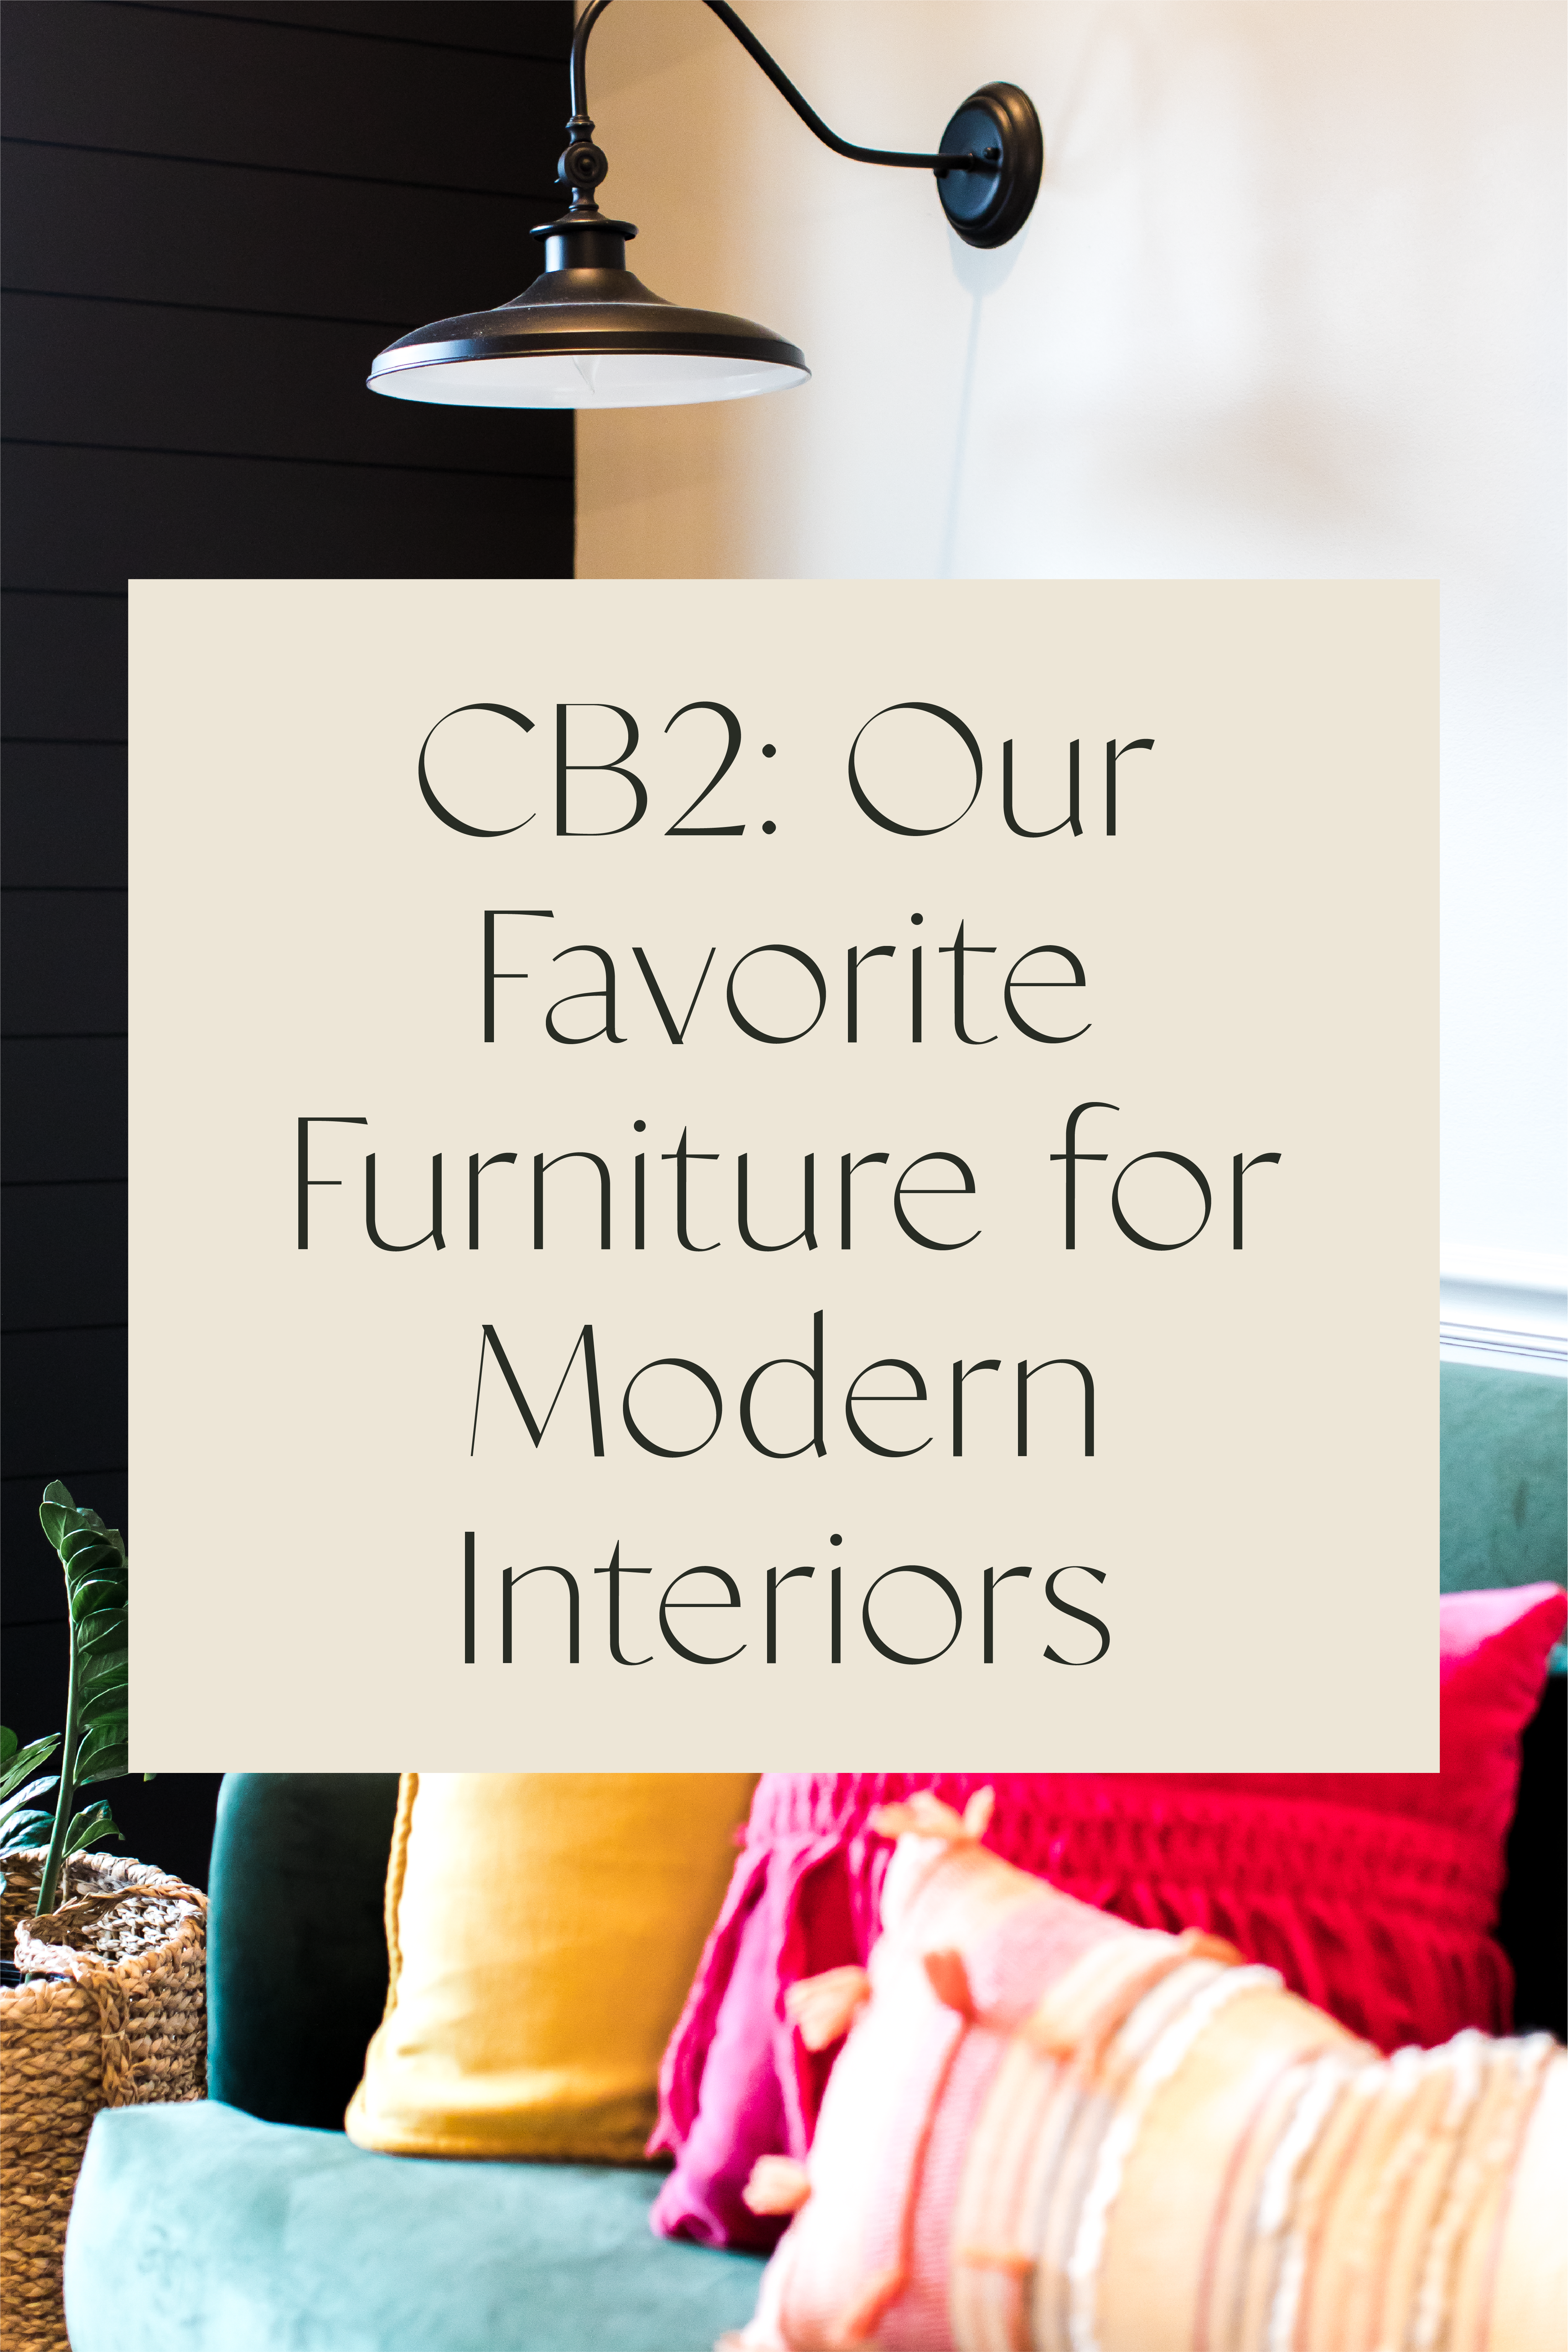 CB2: Our Favorite Furniture for Modern Interiors 2